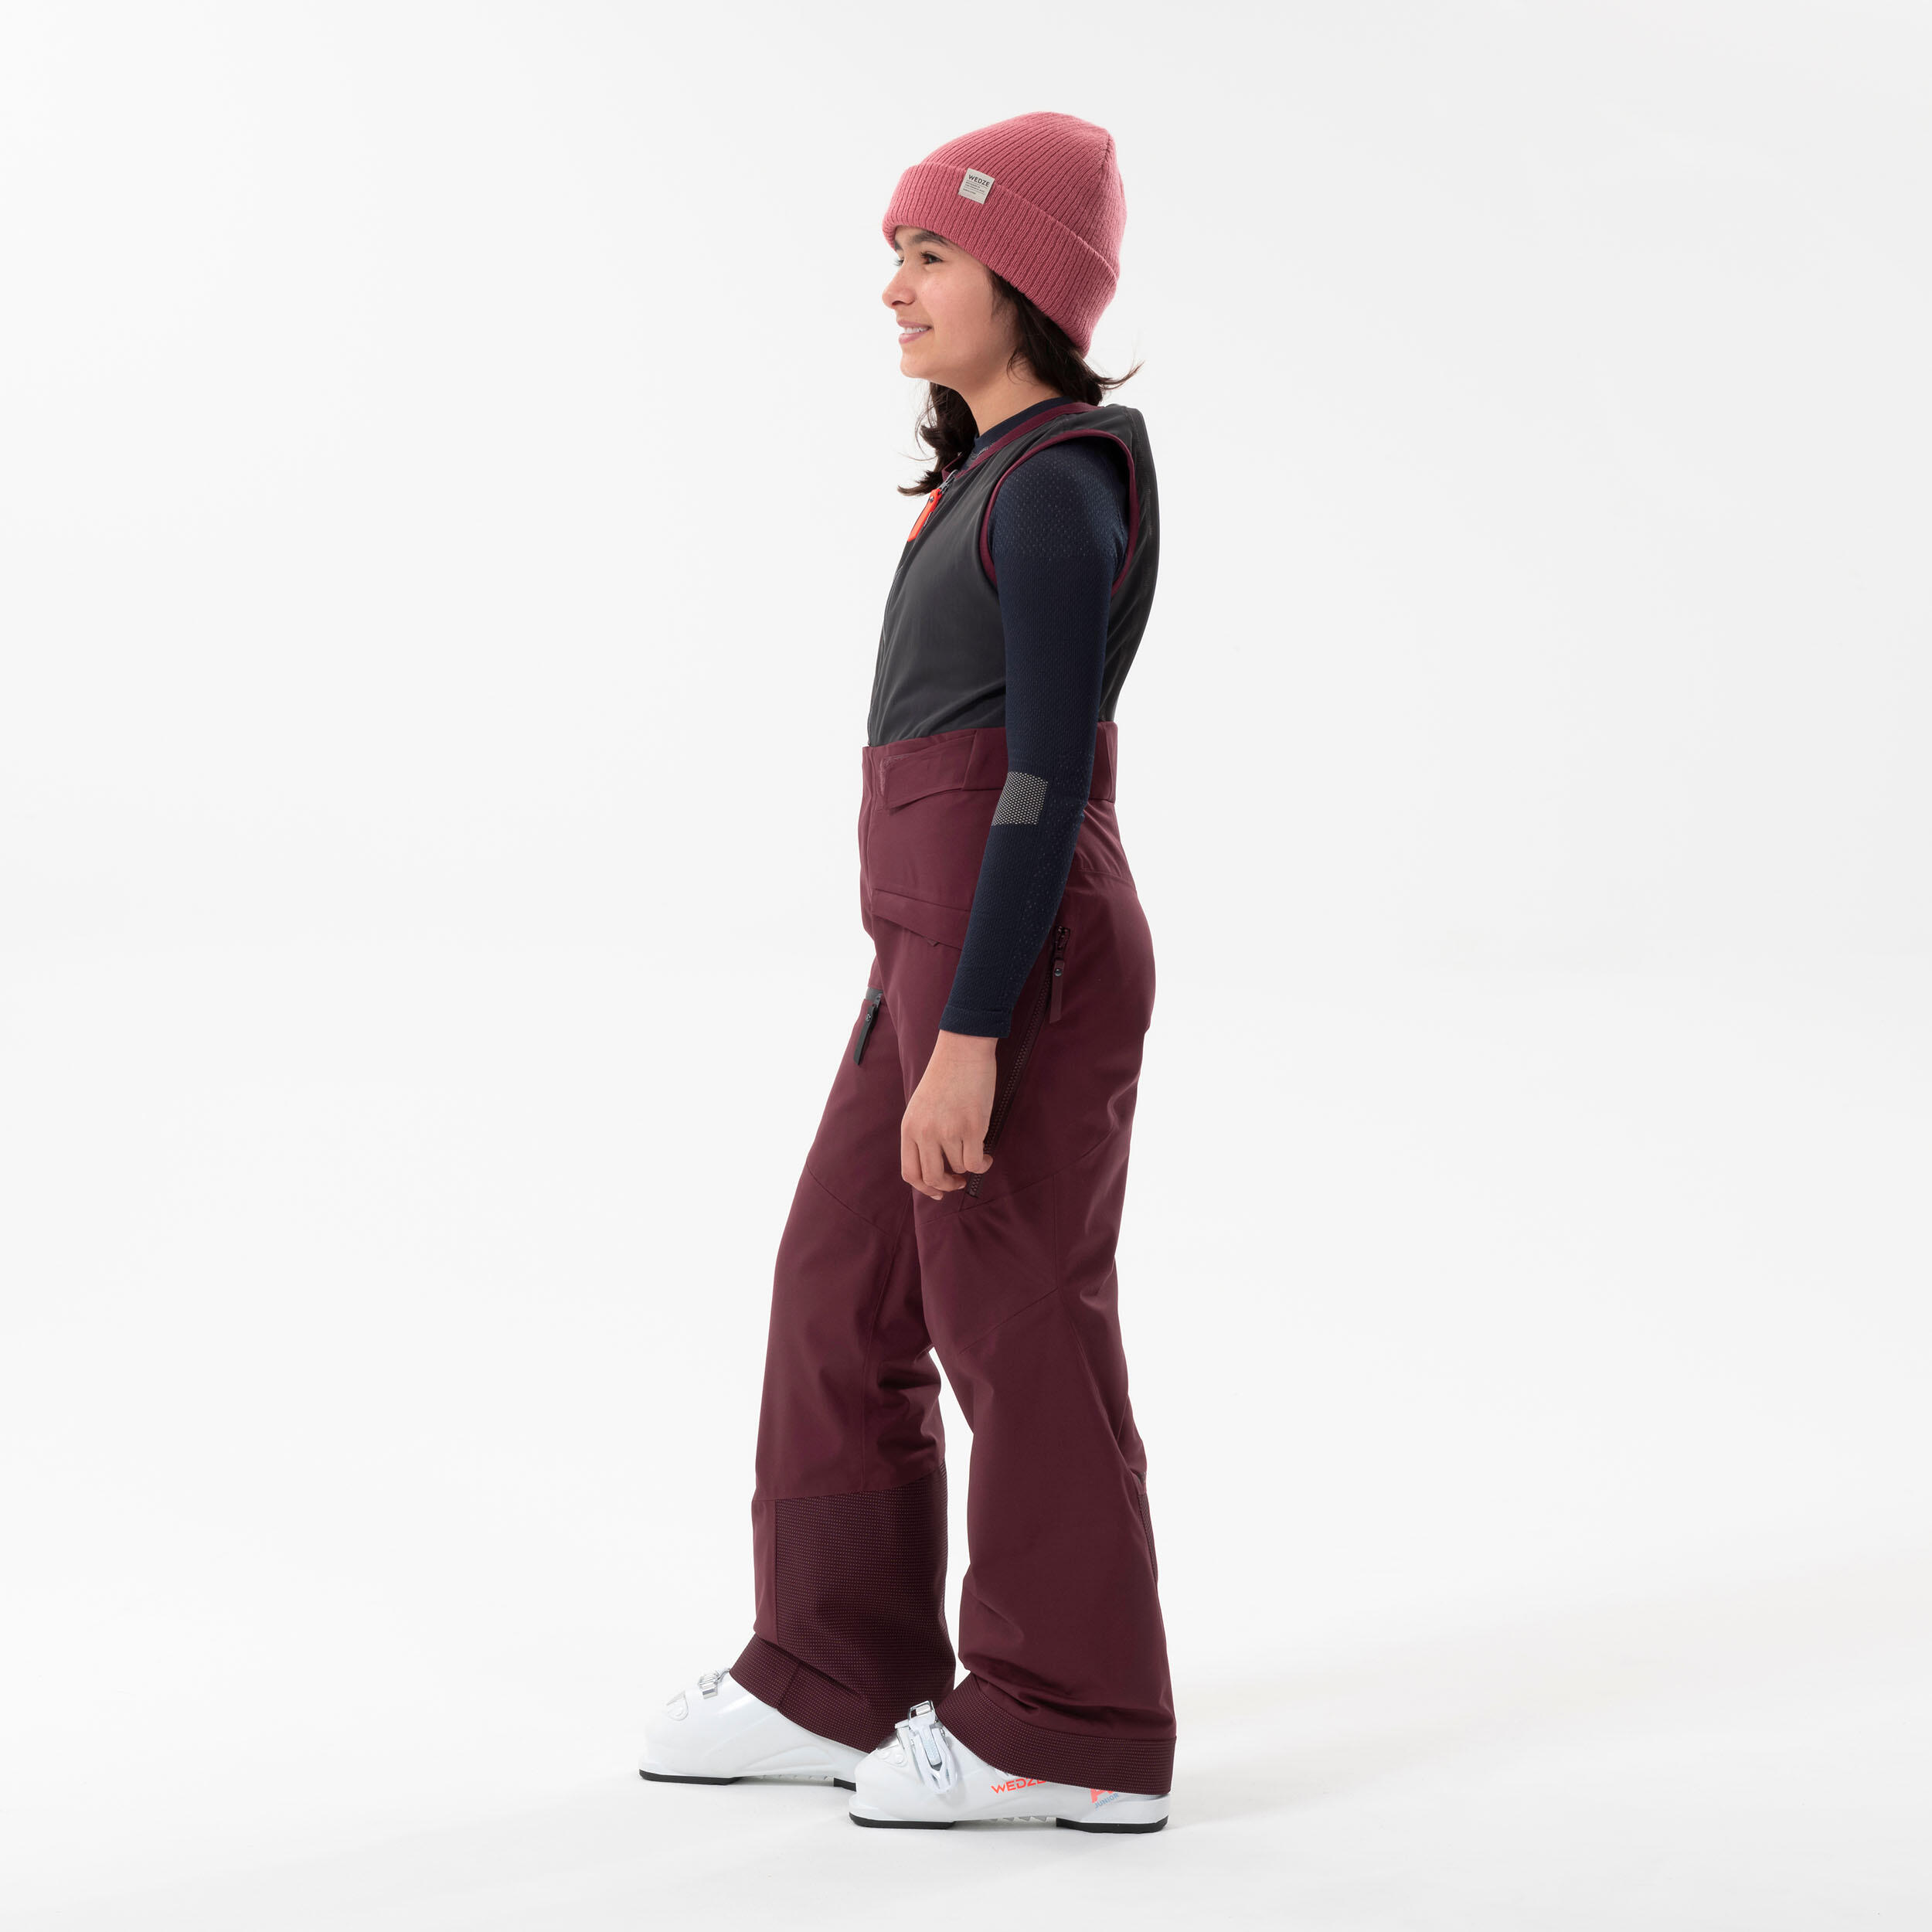 KIDS’ SKI TROUSERS WITH BACK PROTECTOR - FR900 - BURGUNDY 2/11